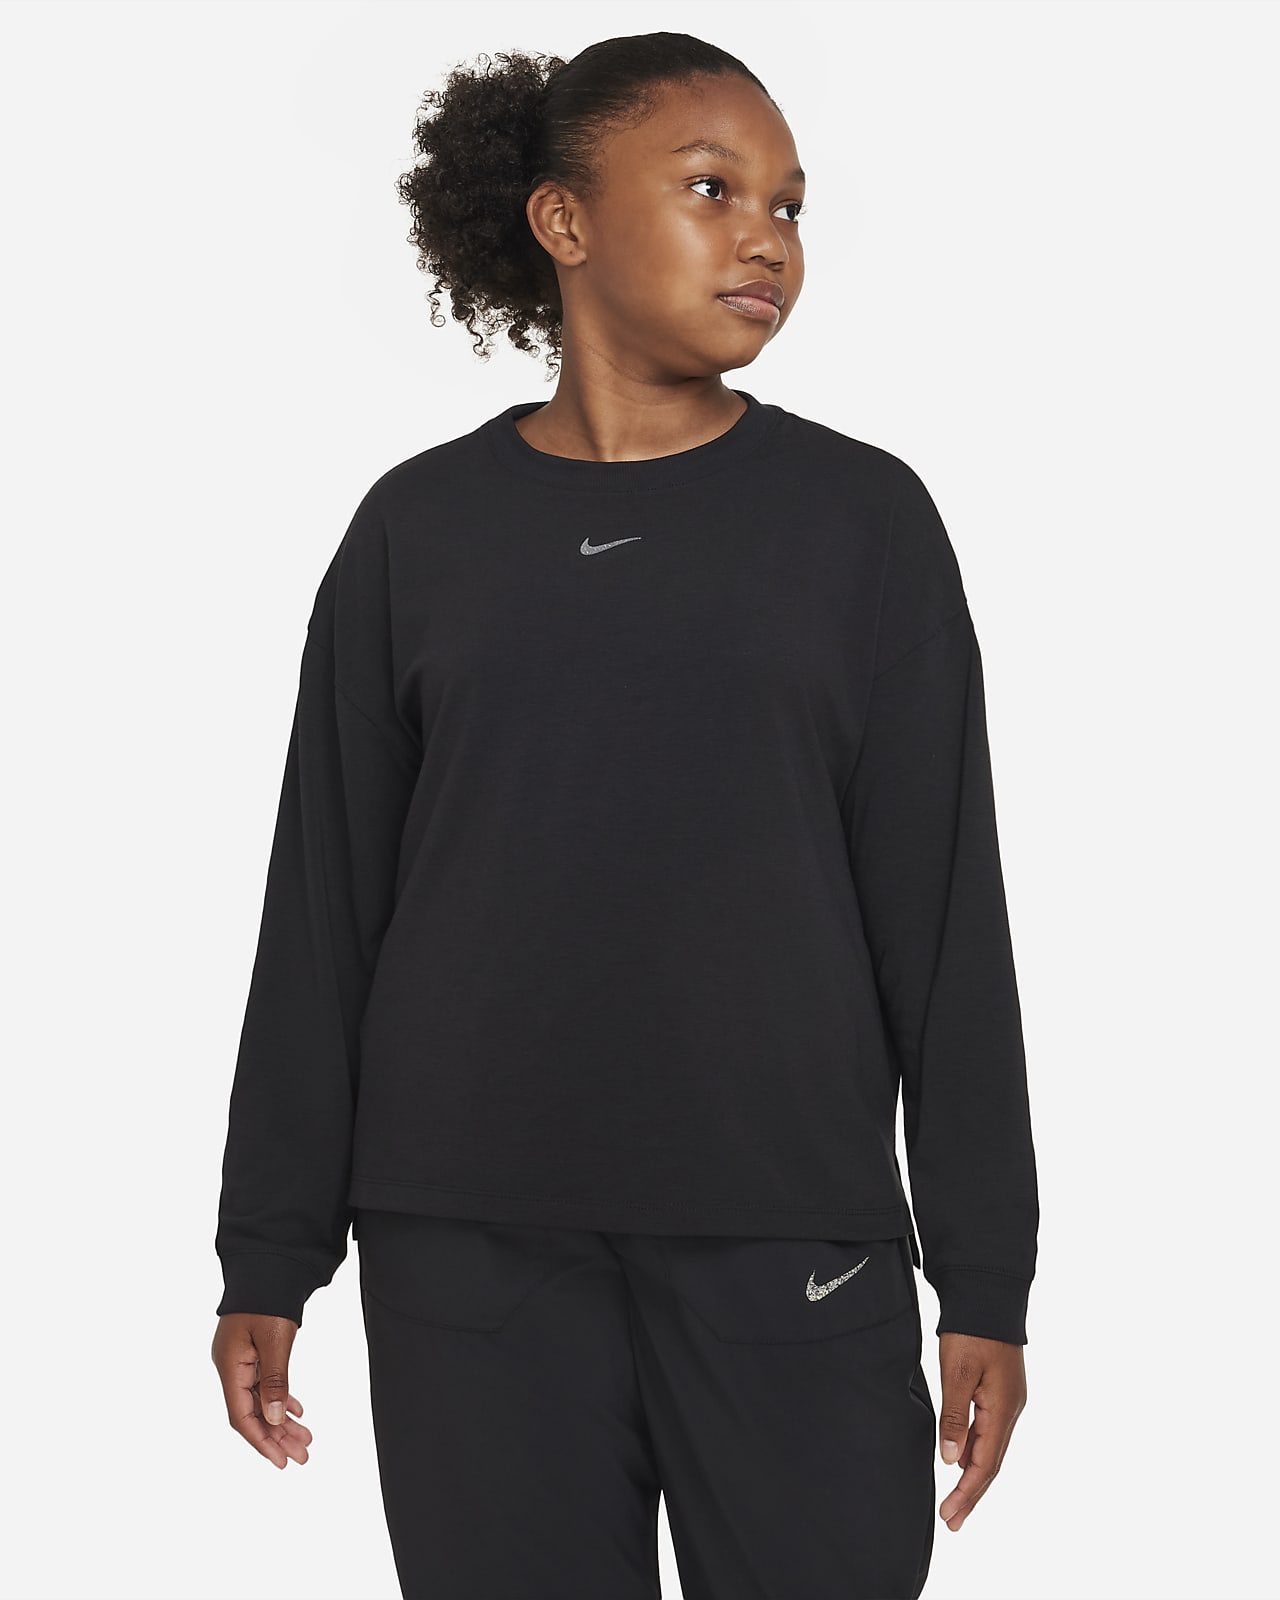 https://static.nike.com/a/images/t_PDP_1280_v1/f_auto,q_auto:eco/00e4dc53-b6bc-41dd-9212-8e89d1bc7352/yoga-dri-fit-big-kids-girls-training-top-extended-size-25jQd3.png